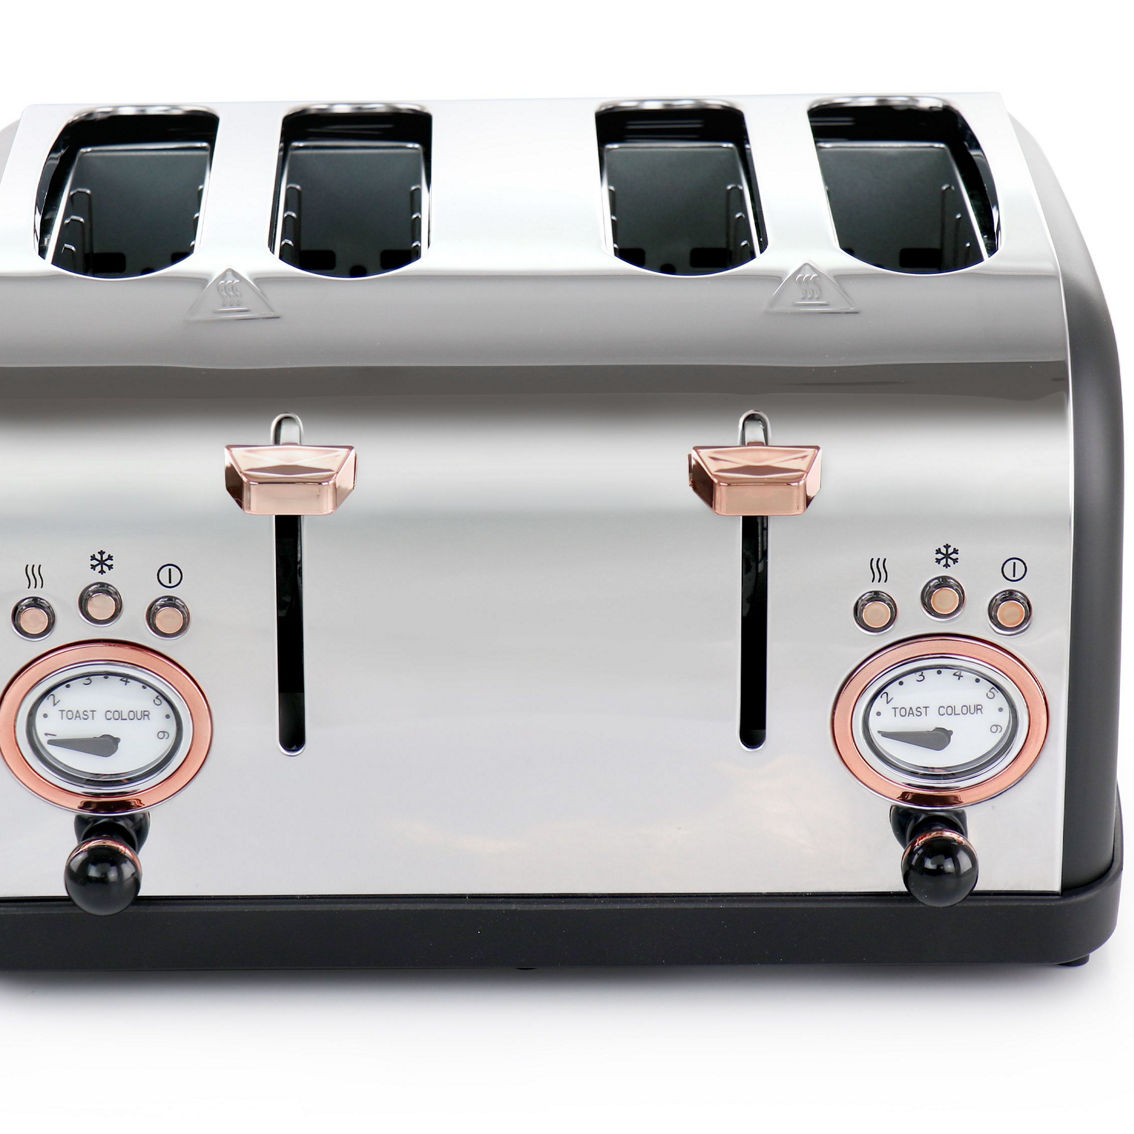 MegaChef 4 Slice Wide Slot Toaster with Variable Browning in Black and Rose Gold - Image 3 of 5